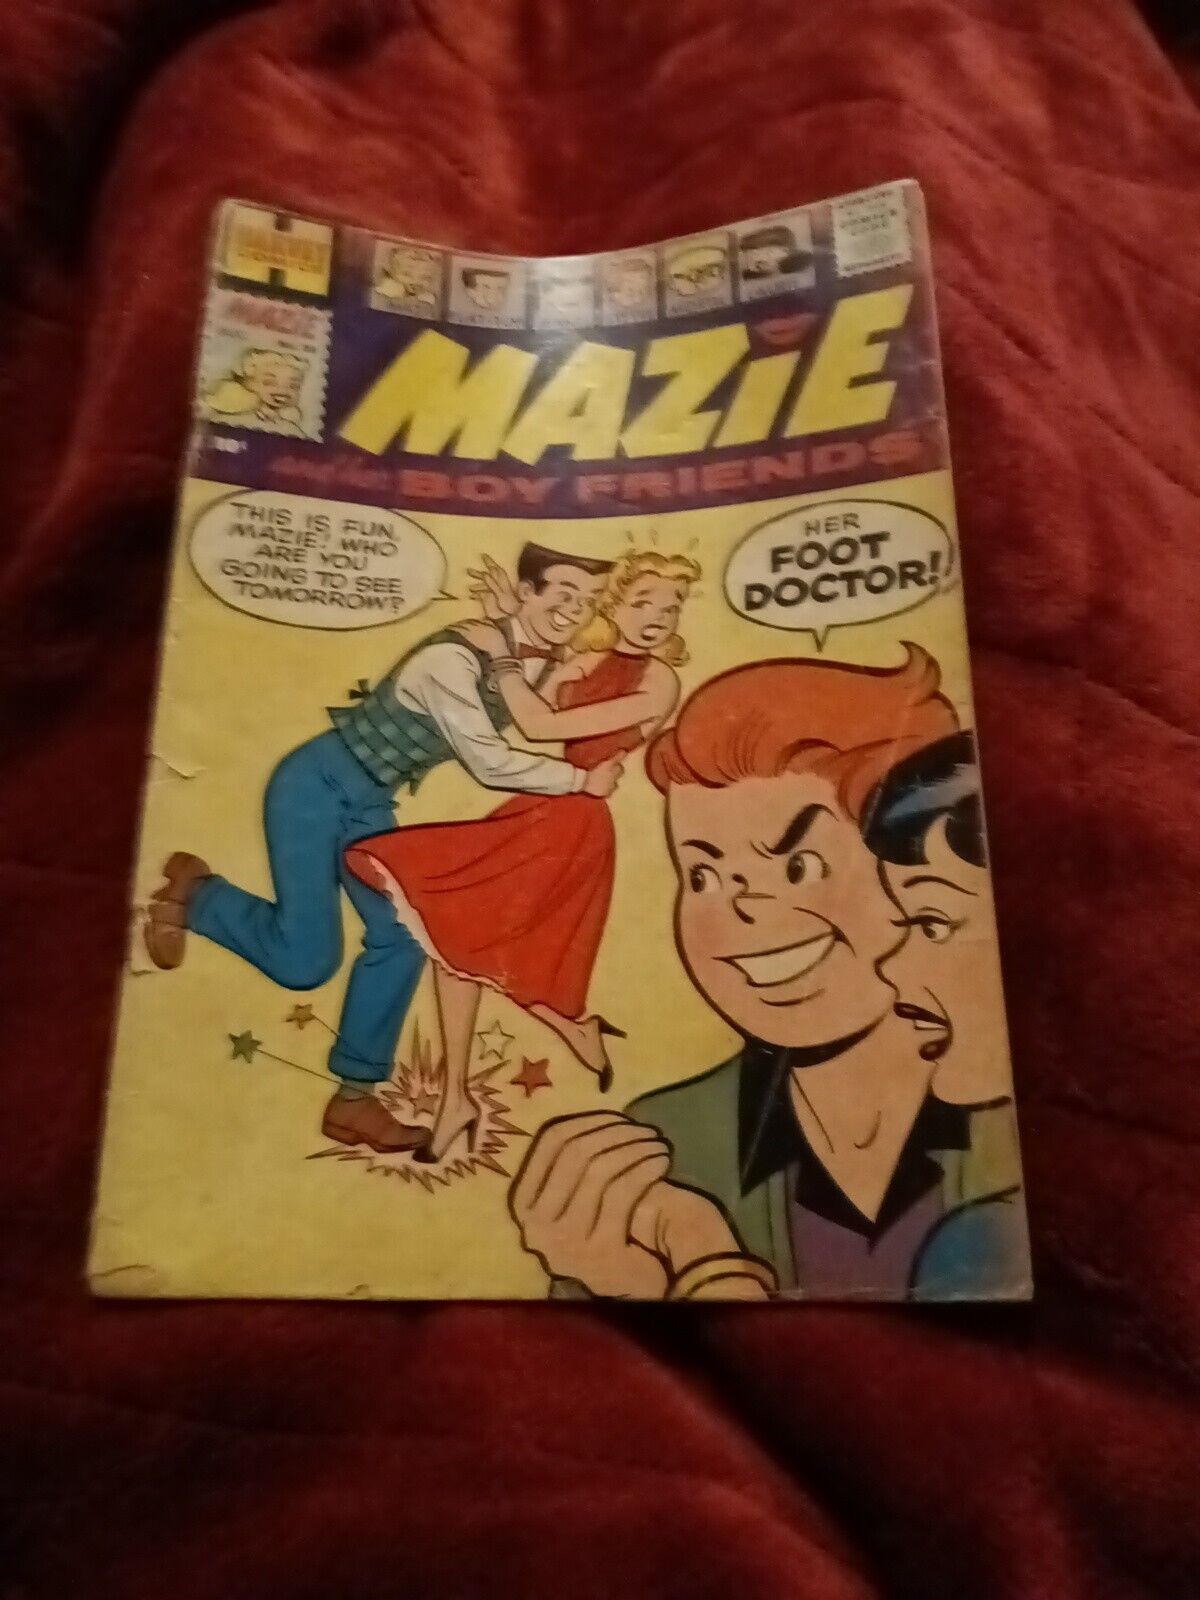 Mazie and her Boyfriends 28 Aug 1958 Harvey Comics SCARCE FINAL ISSUE silver age